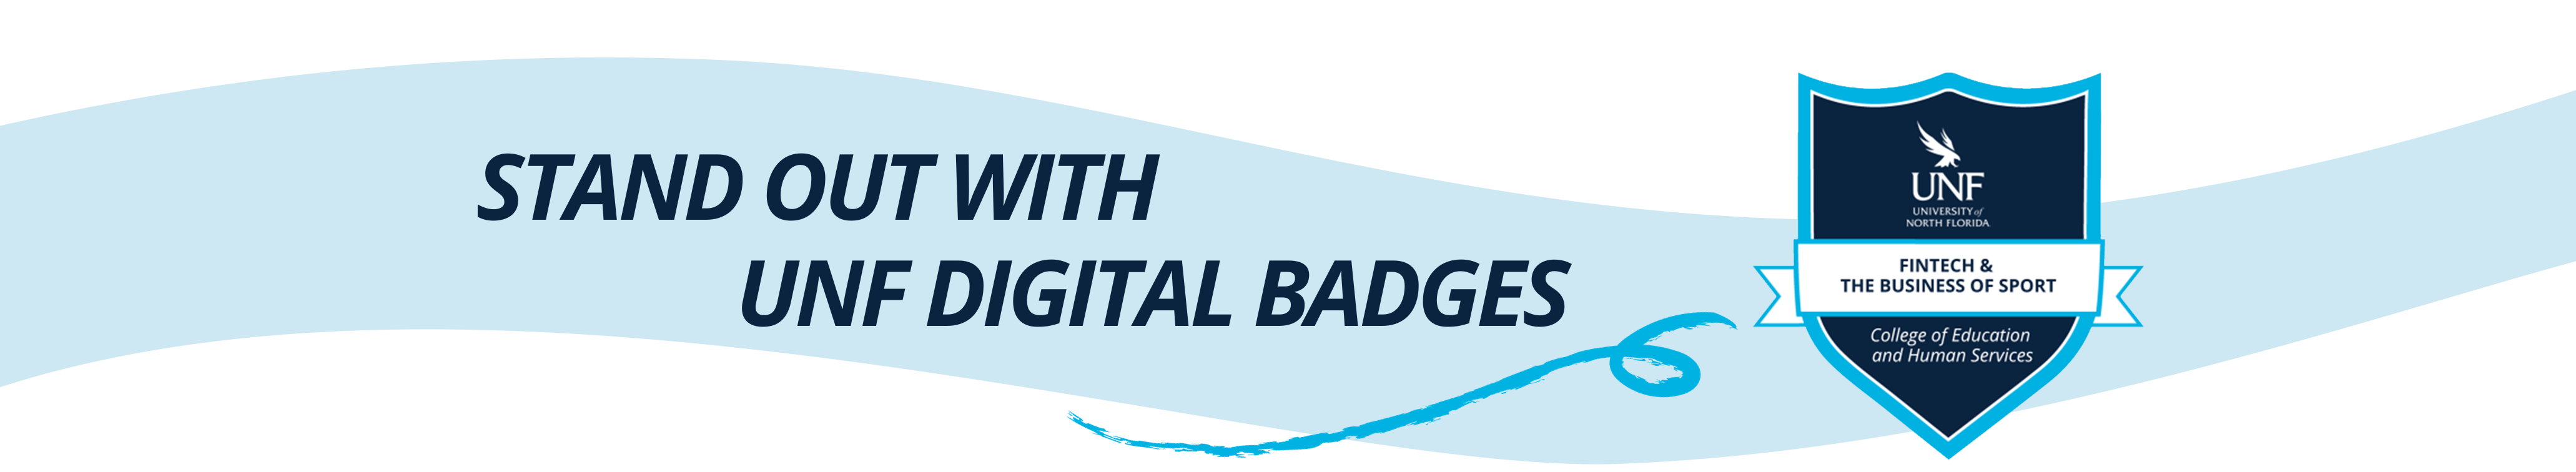 Stand Out with UNF Digital Badges Text with a UNF Digital Badge Template